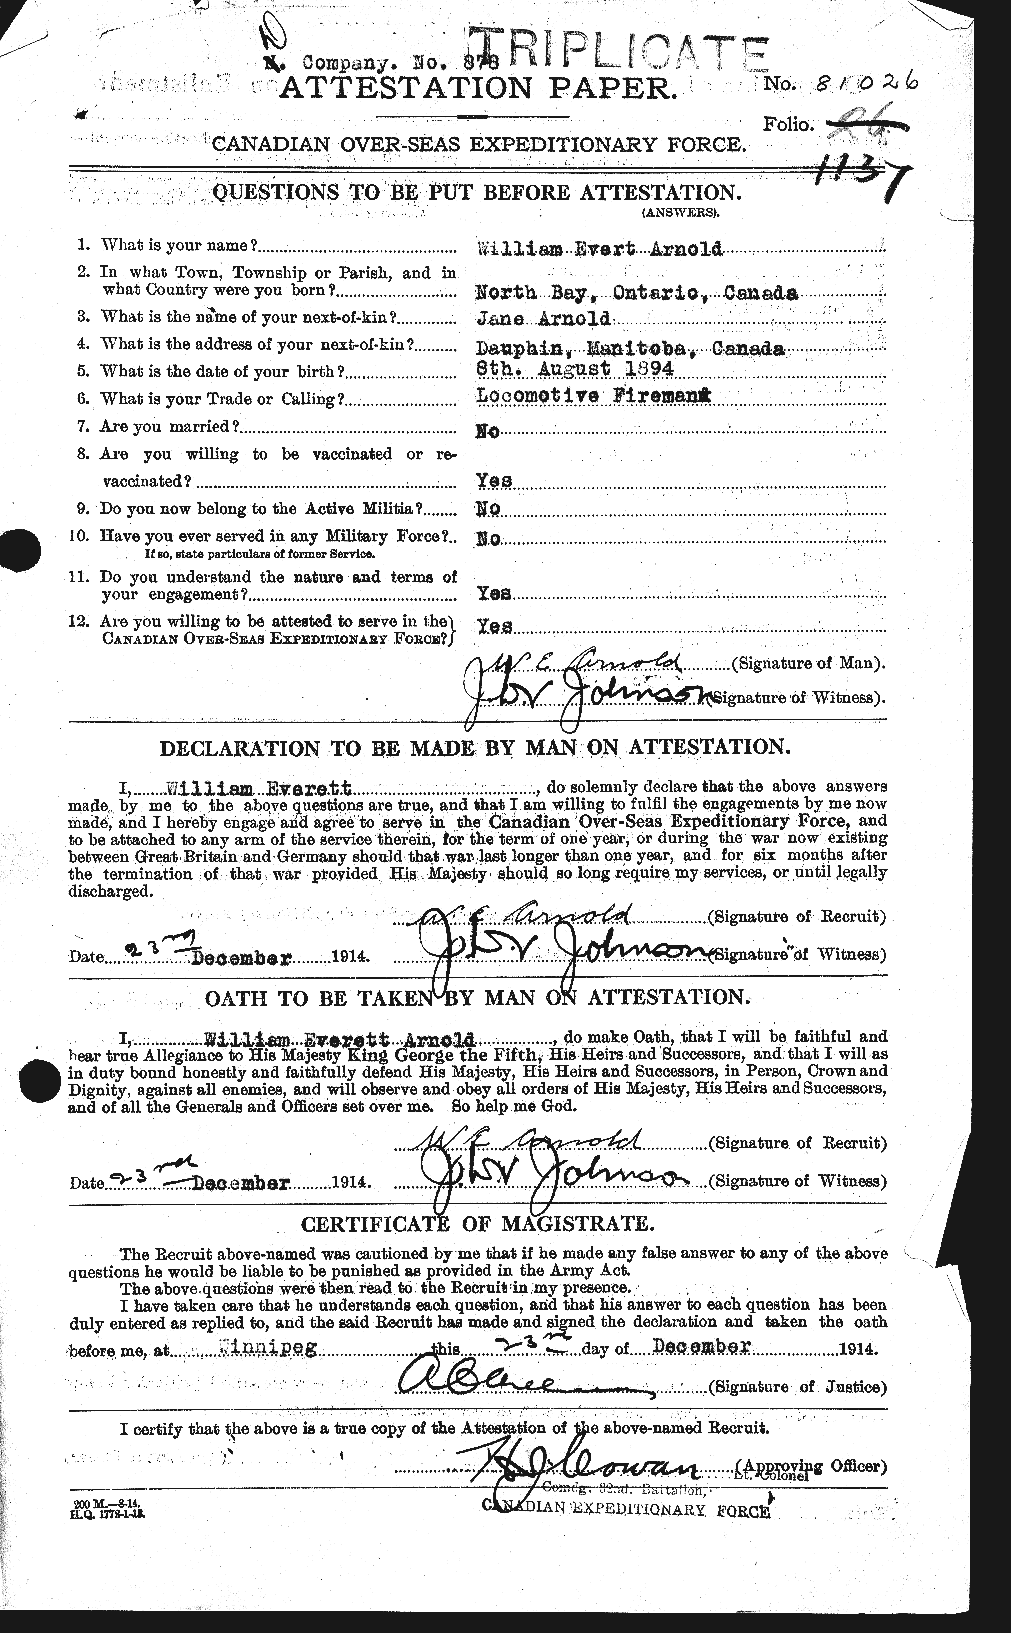 Personnel Records of the First World War - CEF 214446a